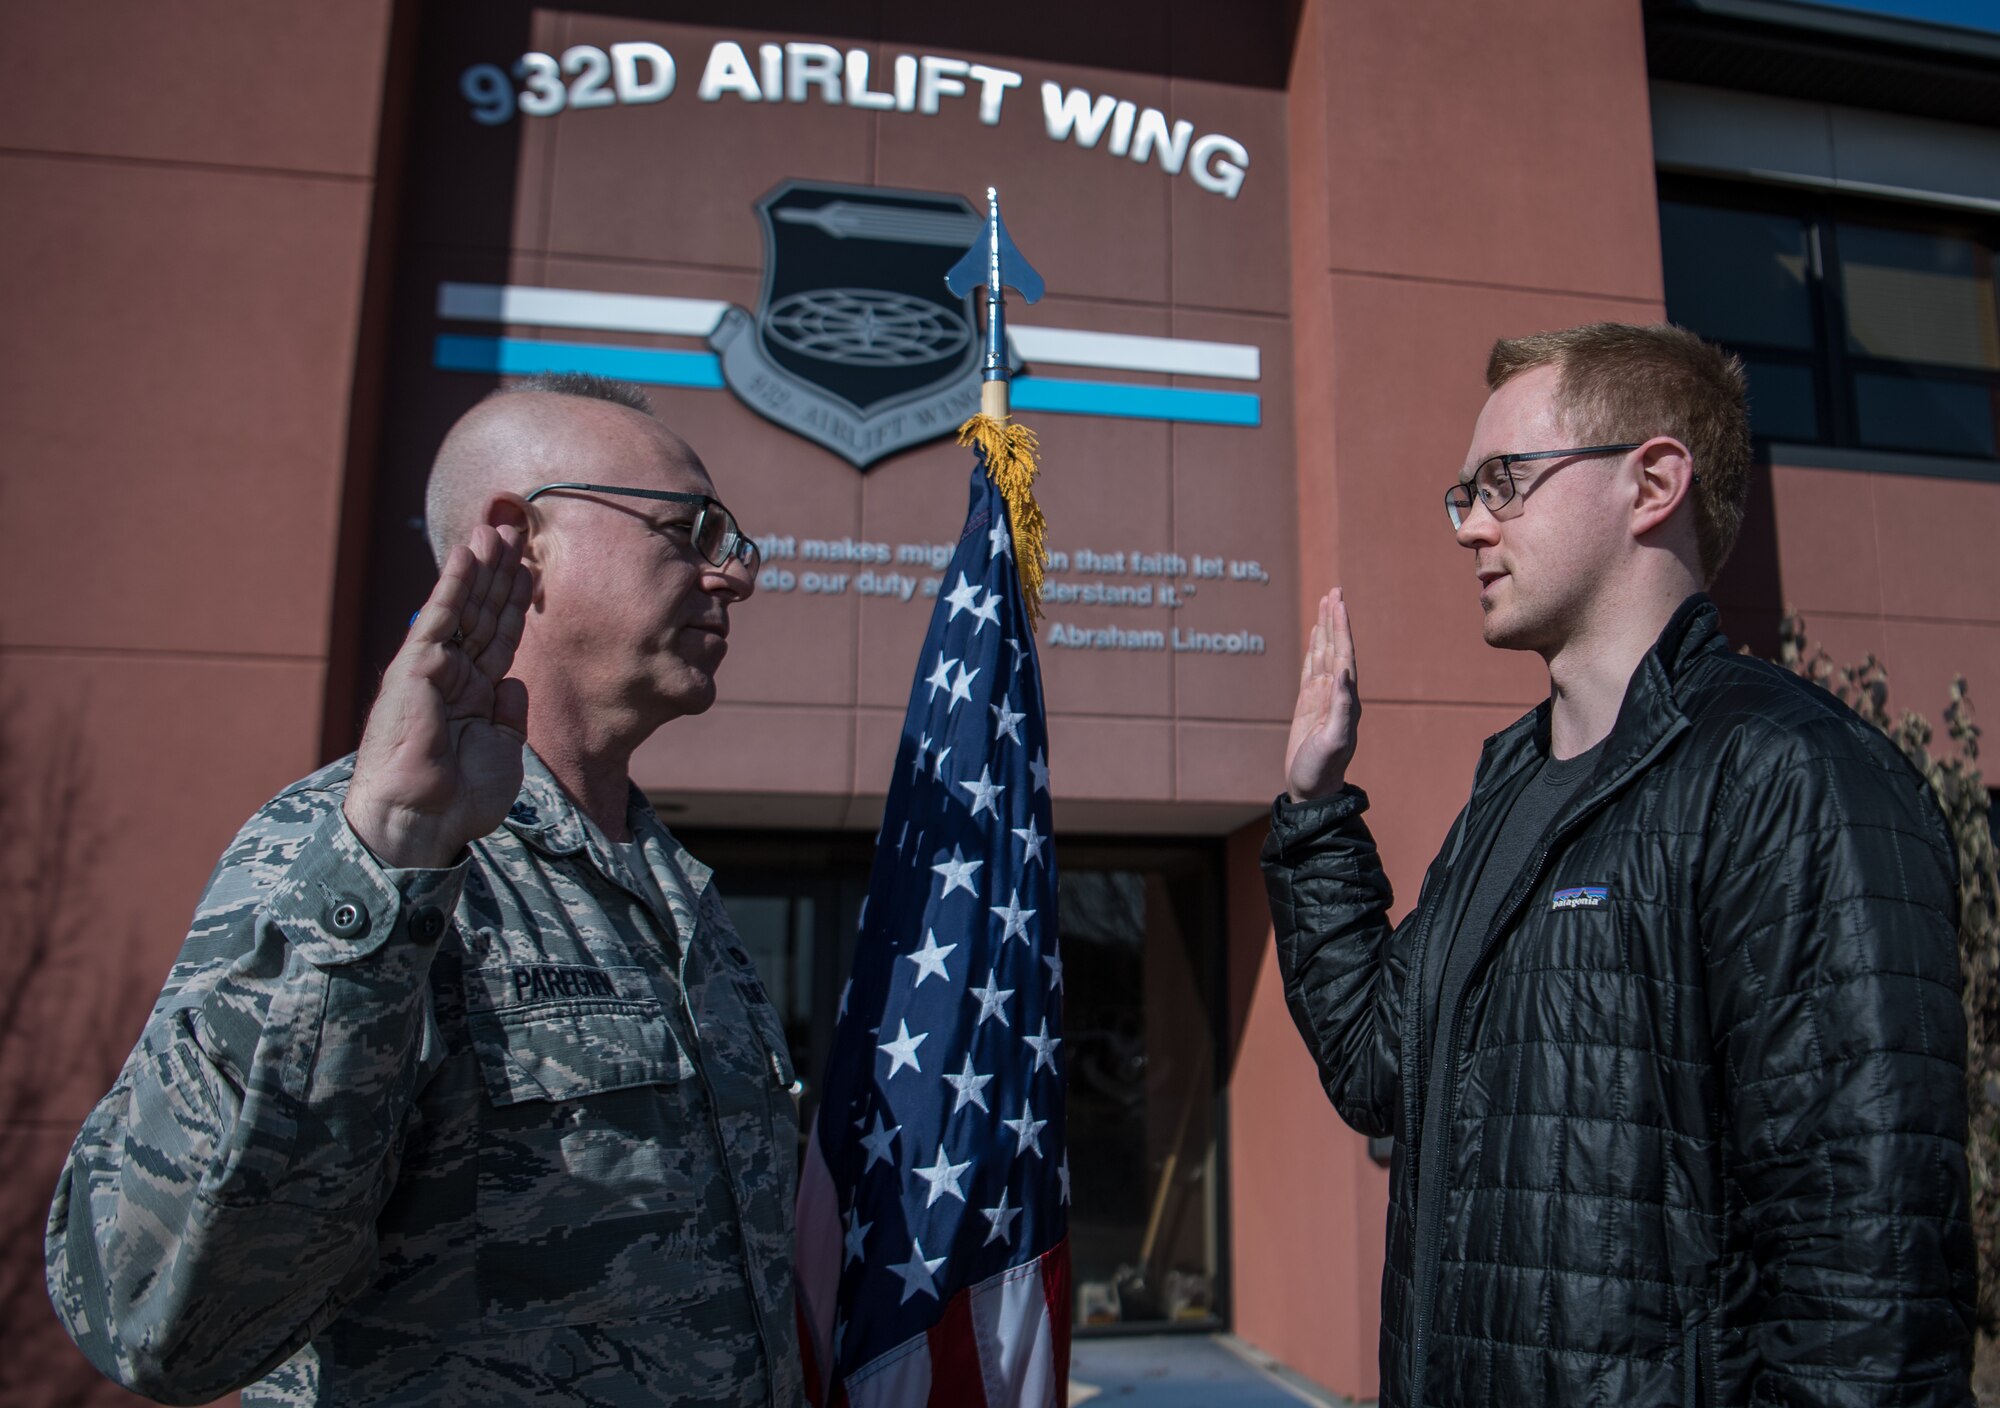 Enlisting into the U.S. Air Force Reserve Command is Casey Earl, right, being given the oath of enlistment by Lt. Col.Stan Paregien, 932nd Airlift Wing Public Affairs Officer, Feb. 25, 2019, 932nd AW headquarters building, Scott Air Force Base, Illinois. Earl will be an E-5, Staff Sgt. For a short time and then begin his Air Force journey to becoming an officer in Cyber Operations. “I chose the Air Force Reserve because it positioned me for great opportunities that matched my civilian career,” said Earl about why he became a citizen Airman.  (U.S. Air Force photo by Christopher Parr)